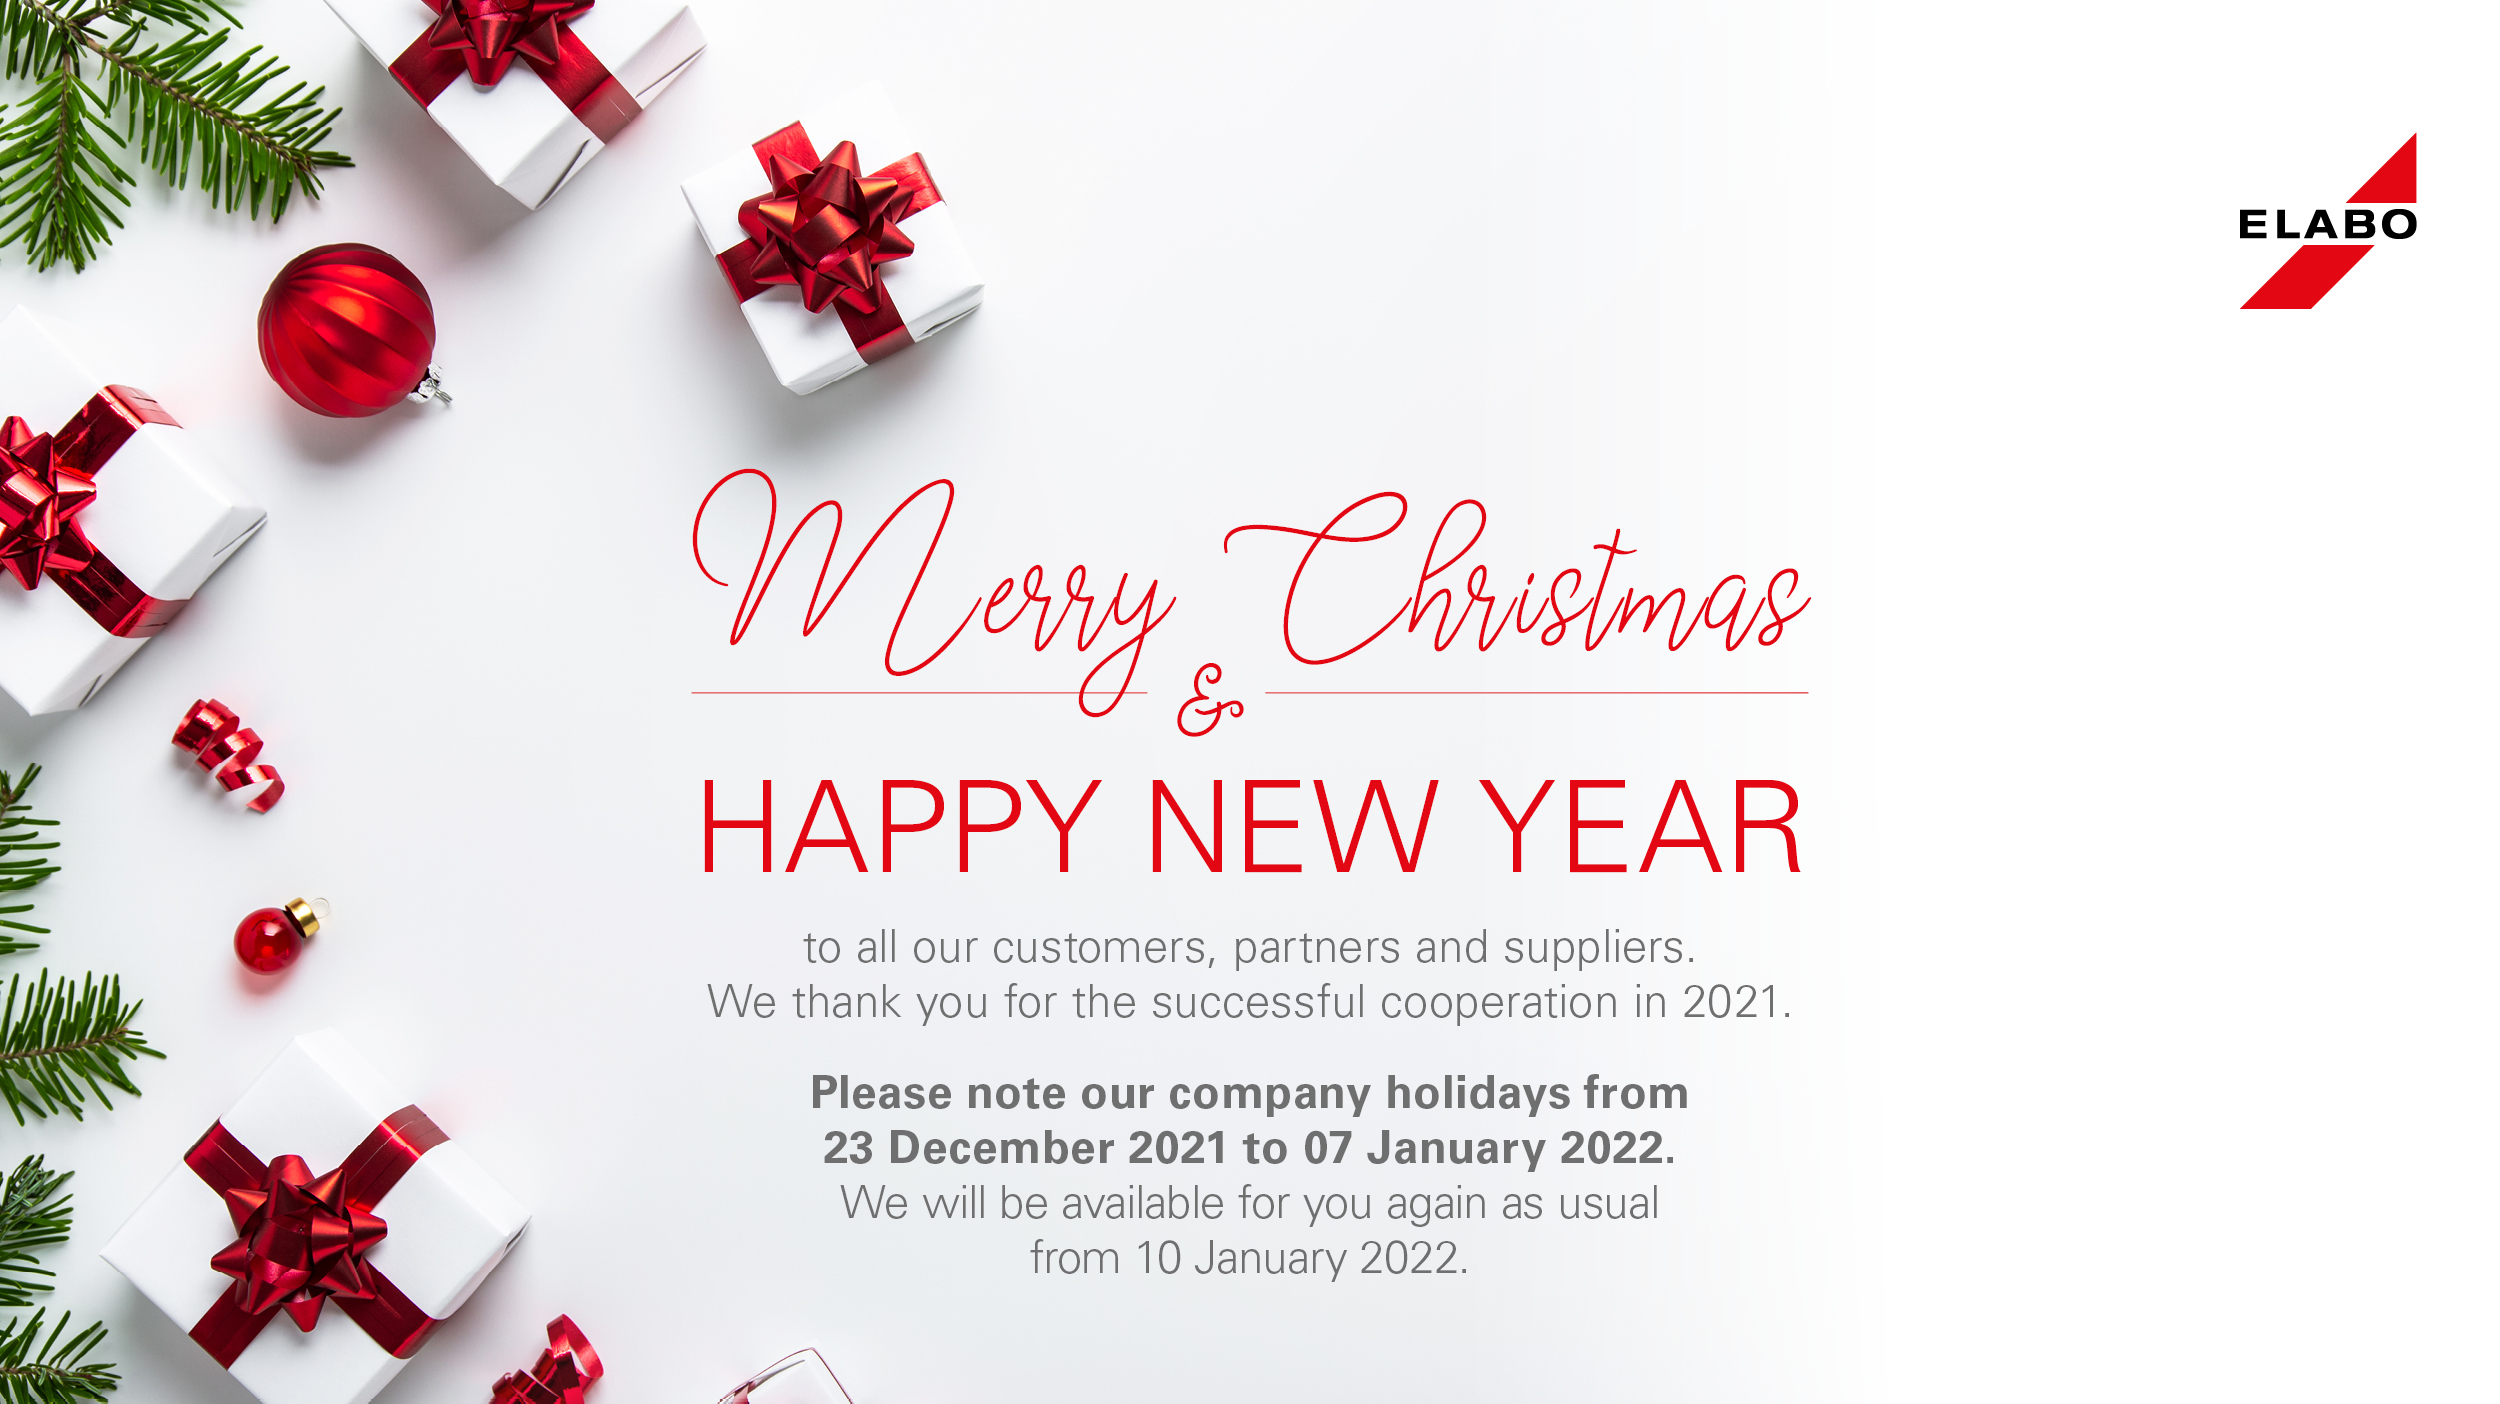 ELABO wishes Merry Christmas and Happy New Year